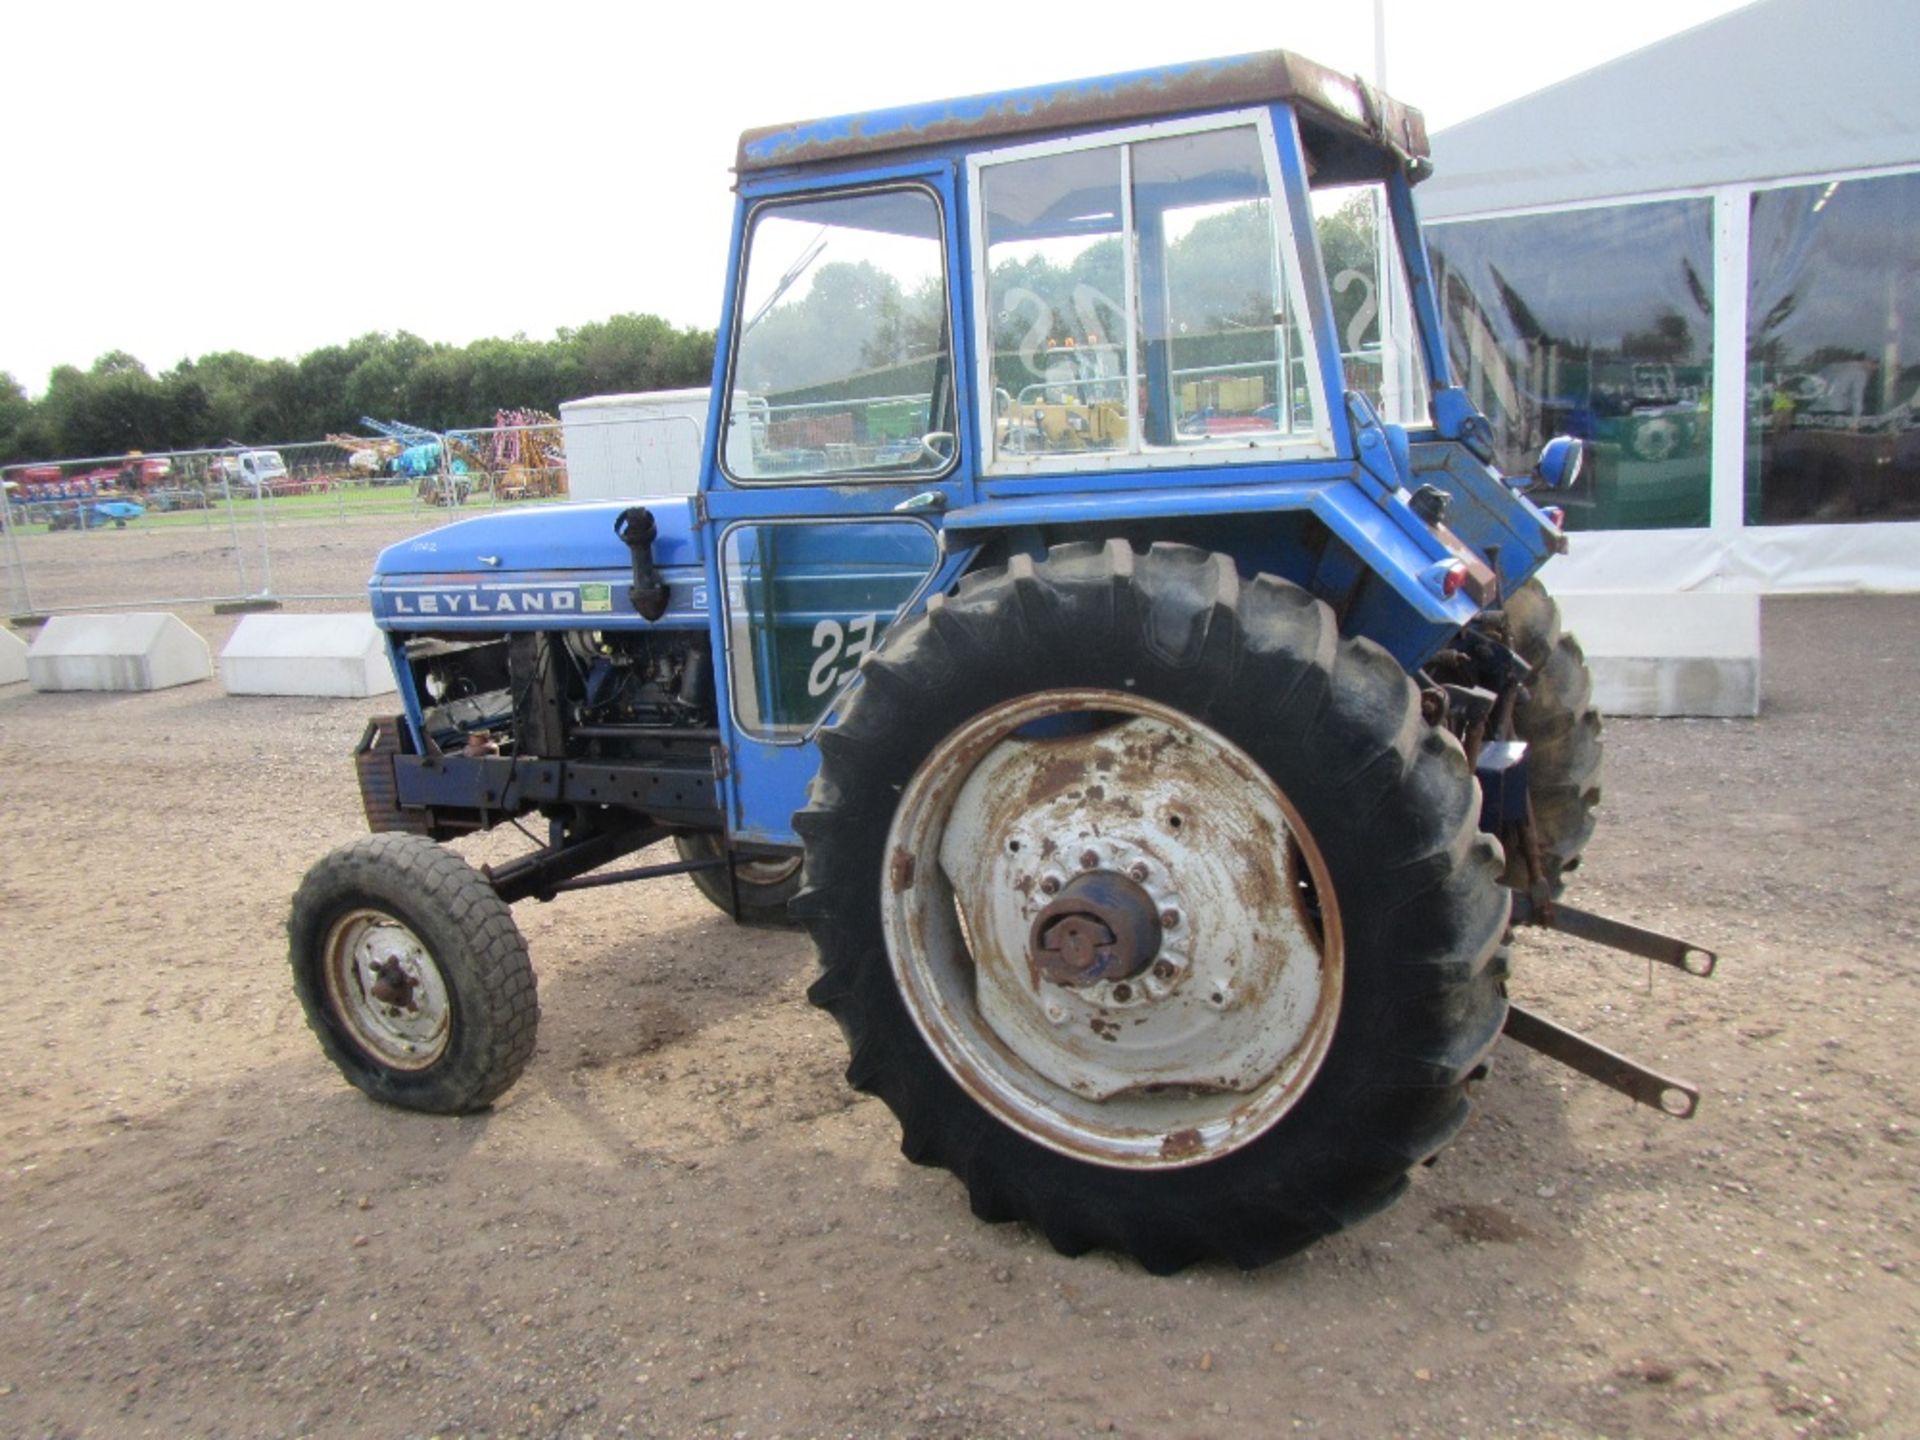 Leyland 384 2wd Tractor with Weights Reg No TJL 962K Ser No 301729 UNRESERVED LOT - Image 9 of 16